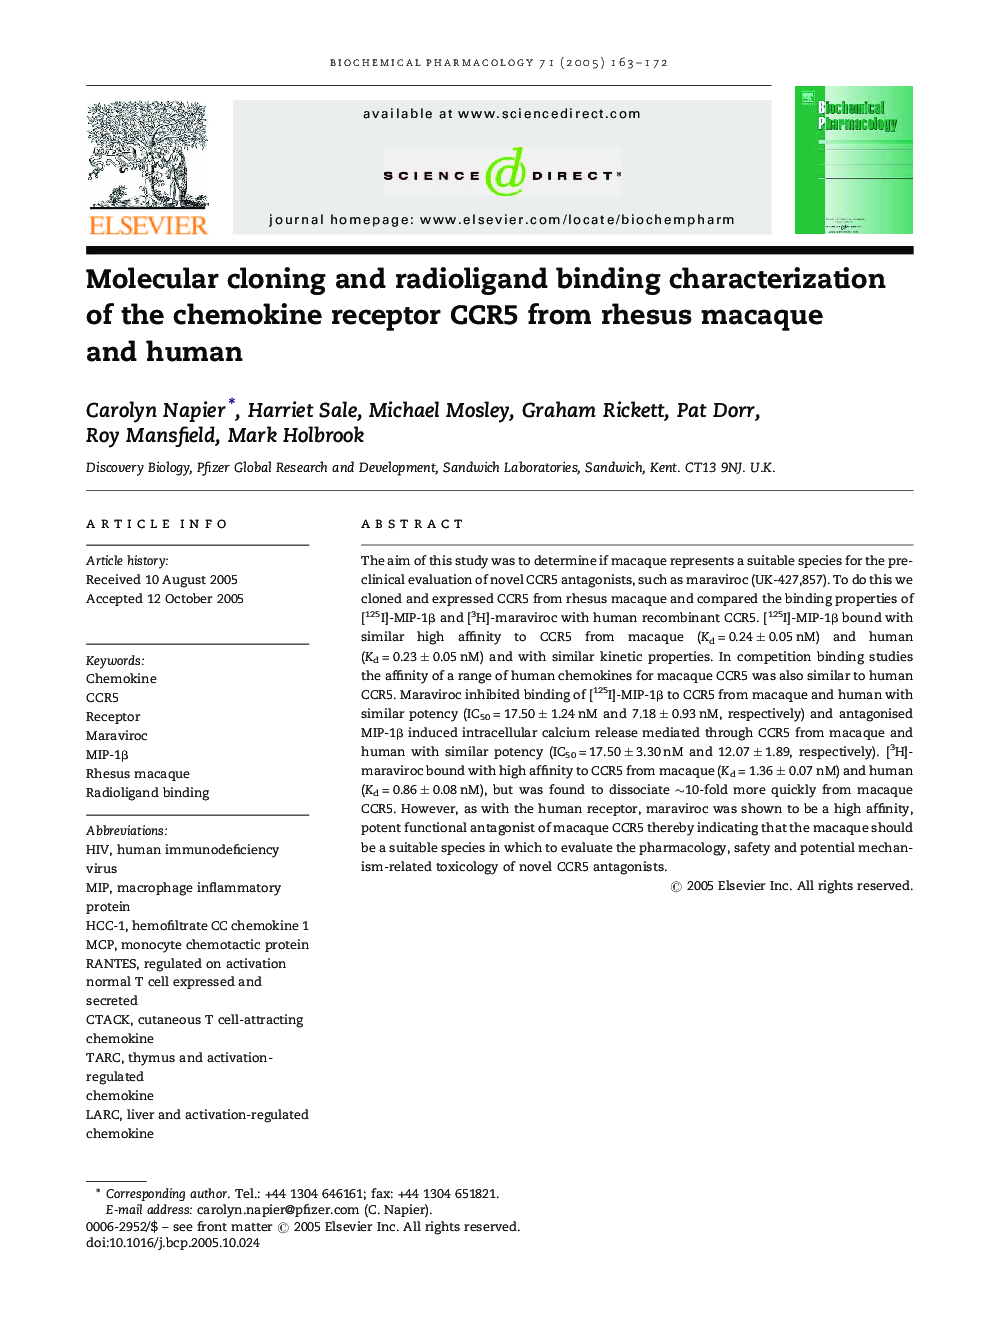 Molecular cloning and radioligand binding characterization of the chemokine receptor CCR5 from rhesus macaque and human